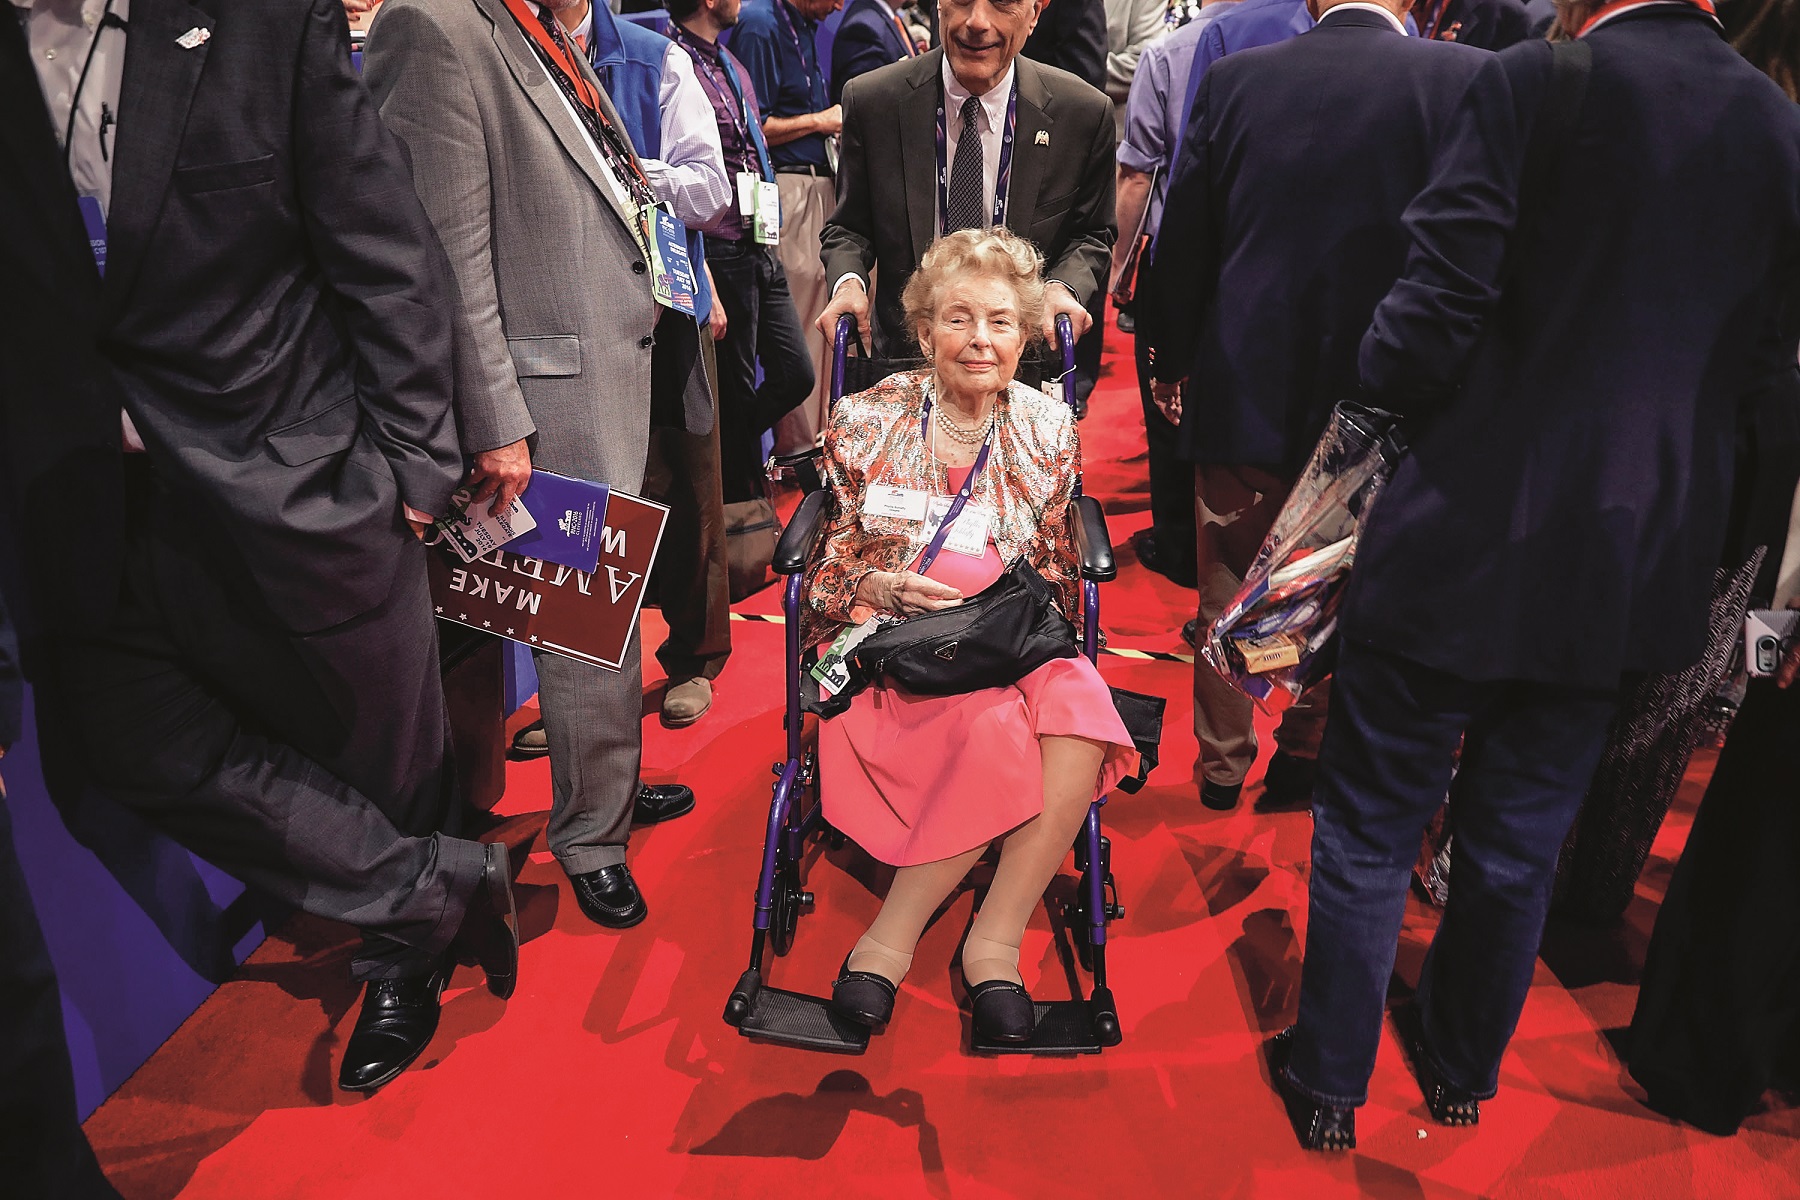 CLEVELAND, OH - JULY 19:  Phyllis Schlafly, president of the Eagle Forum, is wheeled across the floor during the second day of the Republican National Convention at the Quicken Loans Arena July 19, 2016 in Cleveland, Ohio. A well-known conservative, Schlafly launched a successful campaign against the ratification of the Equal Rights Amendment to the U.S. Constitution in the 1970s.  (Photo by Chip Somodevilla/Getty Images)